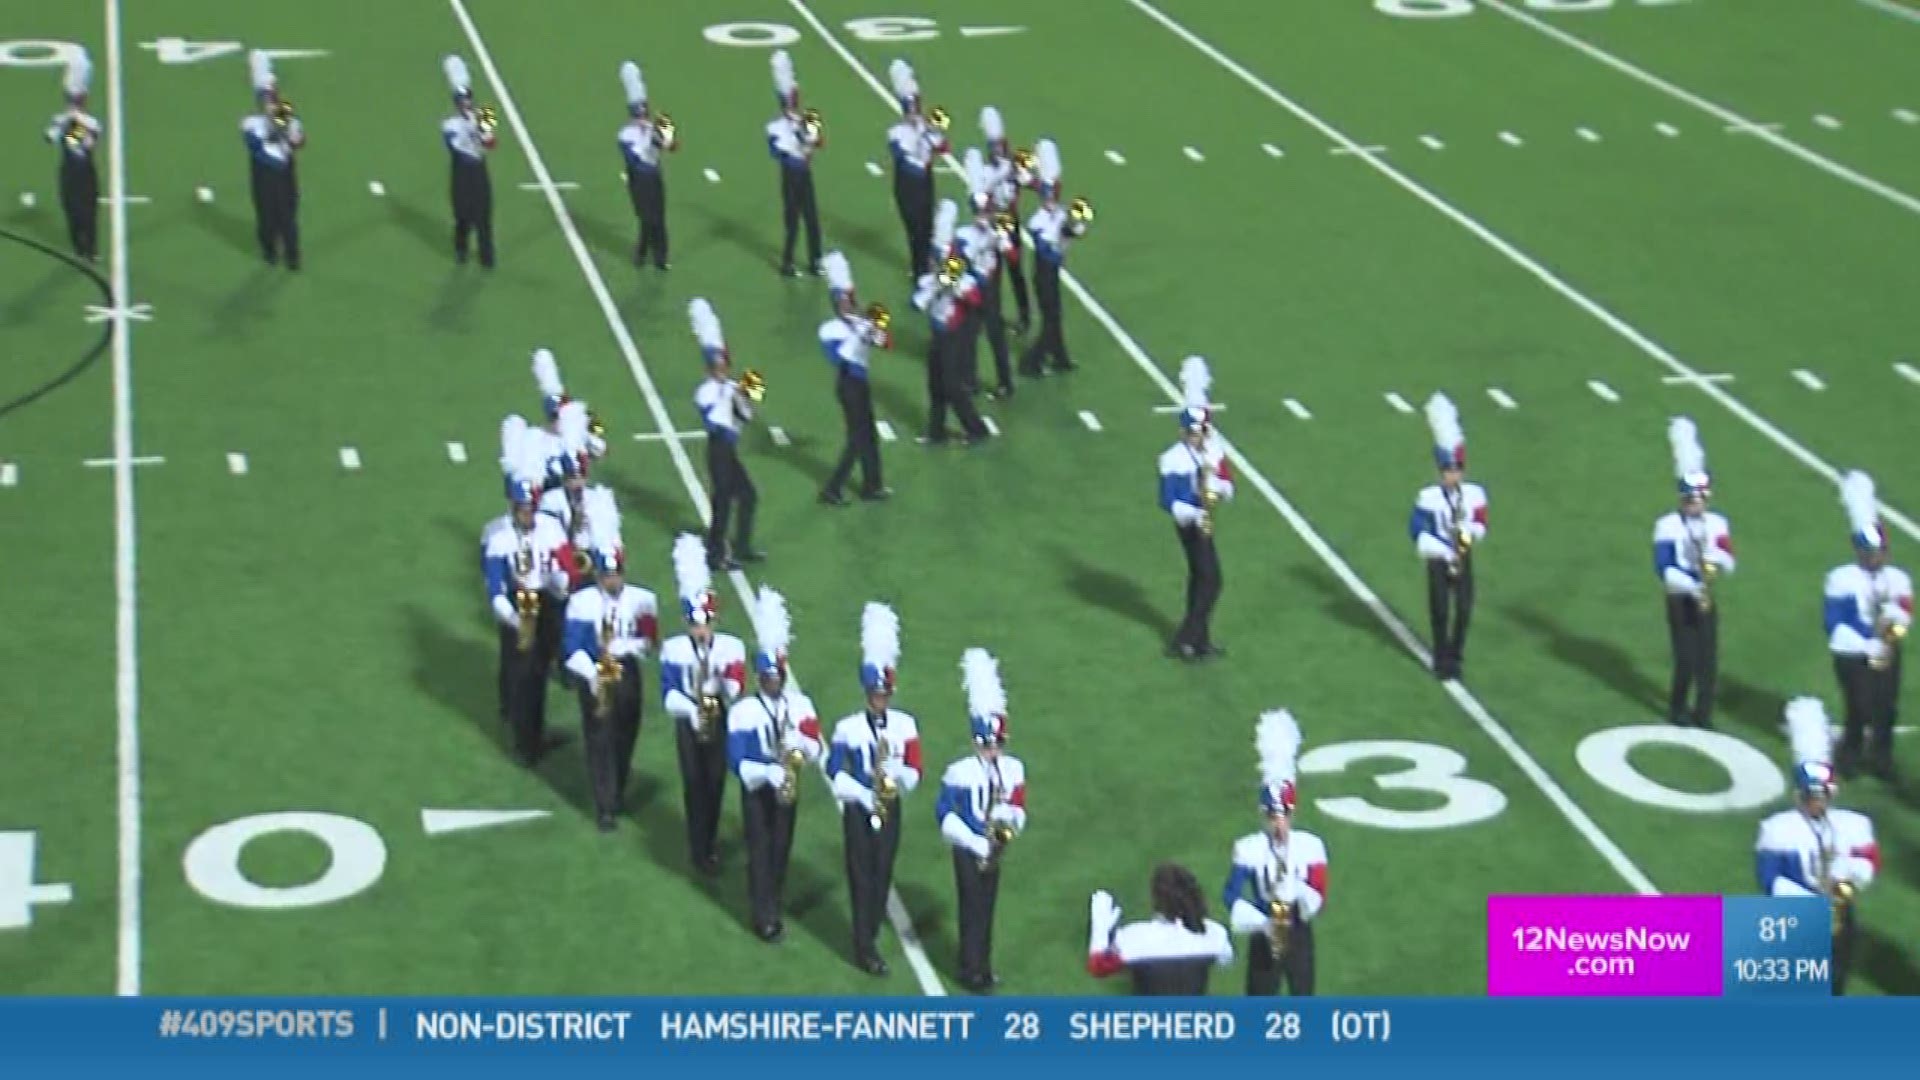 West Brook High School is the 409Sports week six Band of the Week